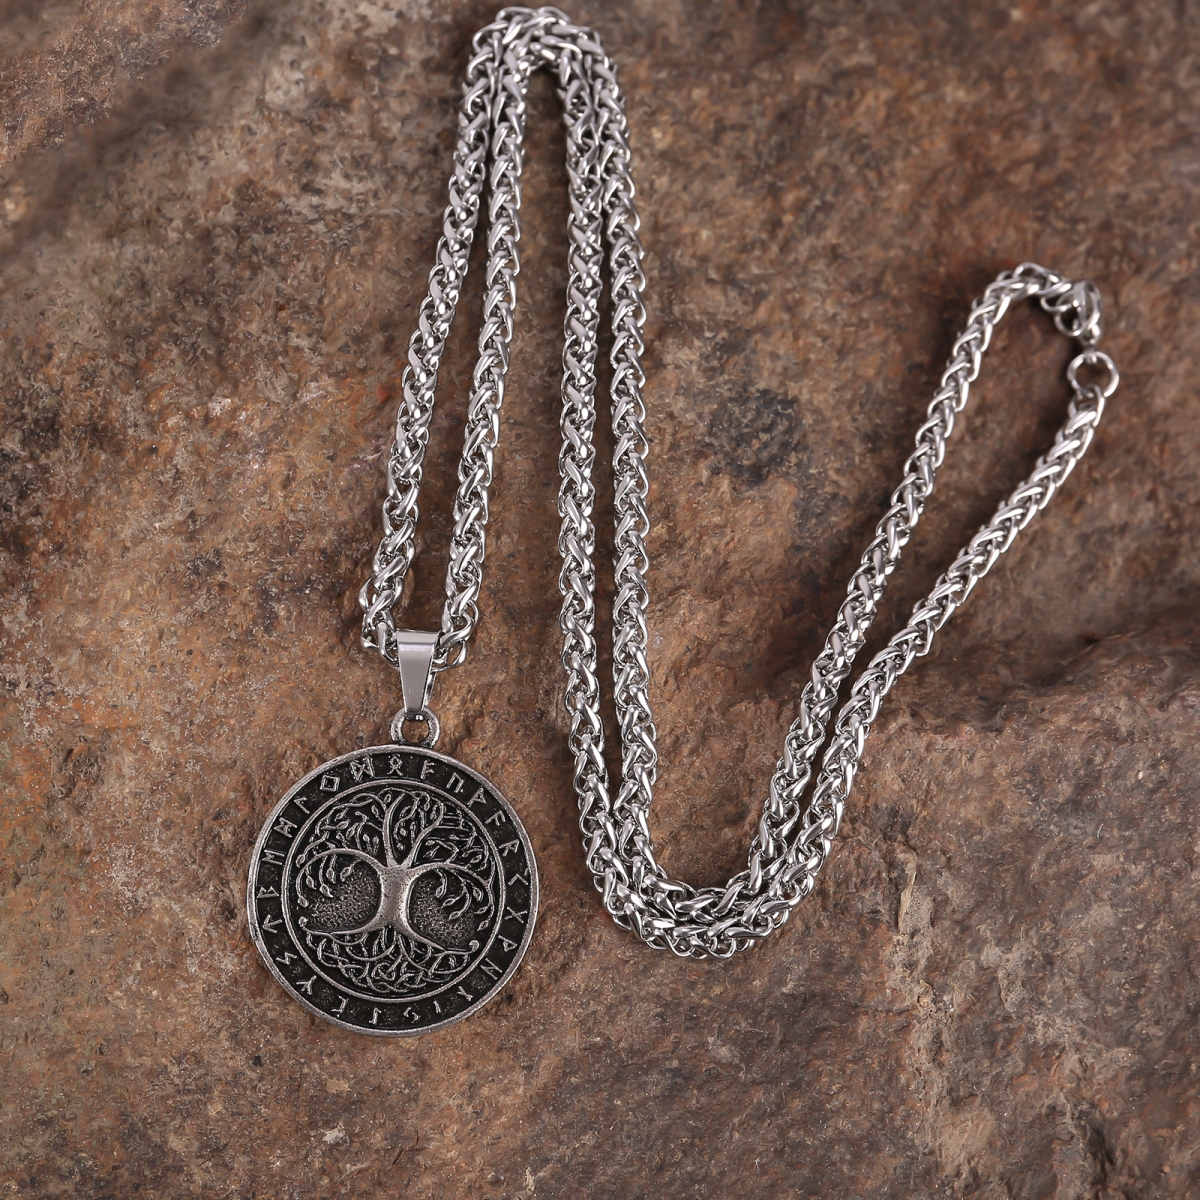 Yggdrasill Necklace US$2.9/PC-NORSECOLLECTION- Viking Jewelry,Viking Necklace,Viking Bracelet,Viking Rings,Viking Mugs,Viking Accessories,Viking Crafts